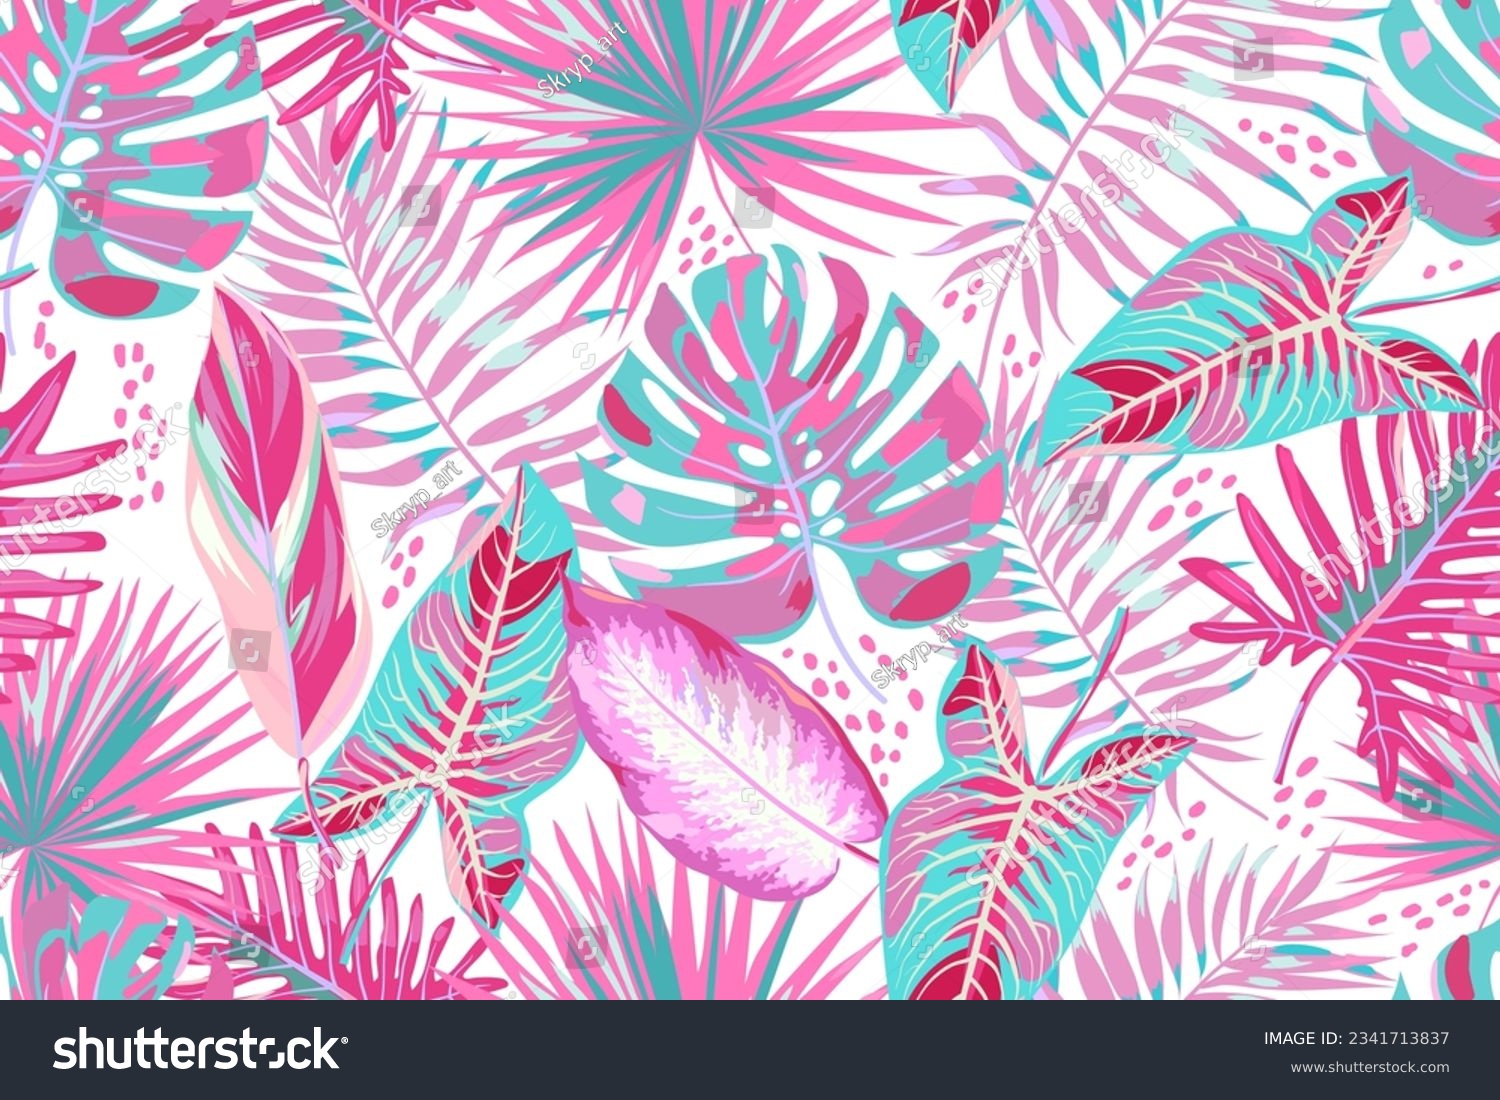 Seamless pattern with tropical leaves on white background. Colorful leaves of palm, monstera, alocasia, philodendron, calathea. Pink and light blue colors.  Summer tropical pattern. Vector. #2341713837